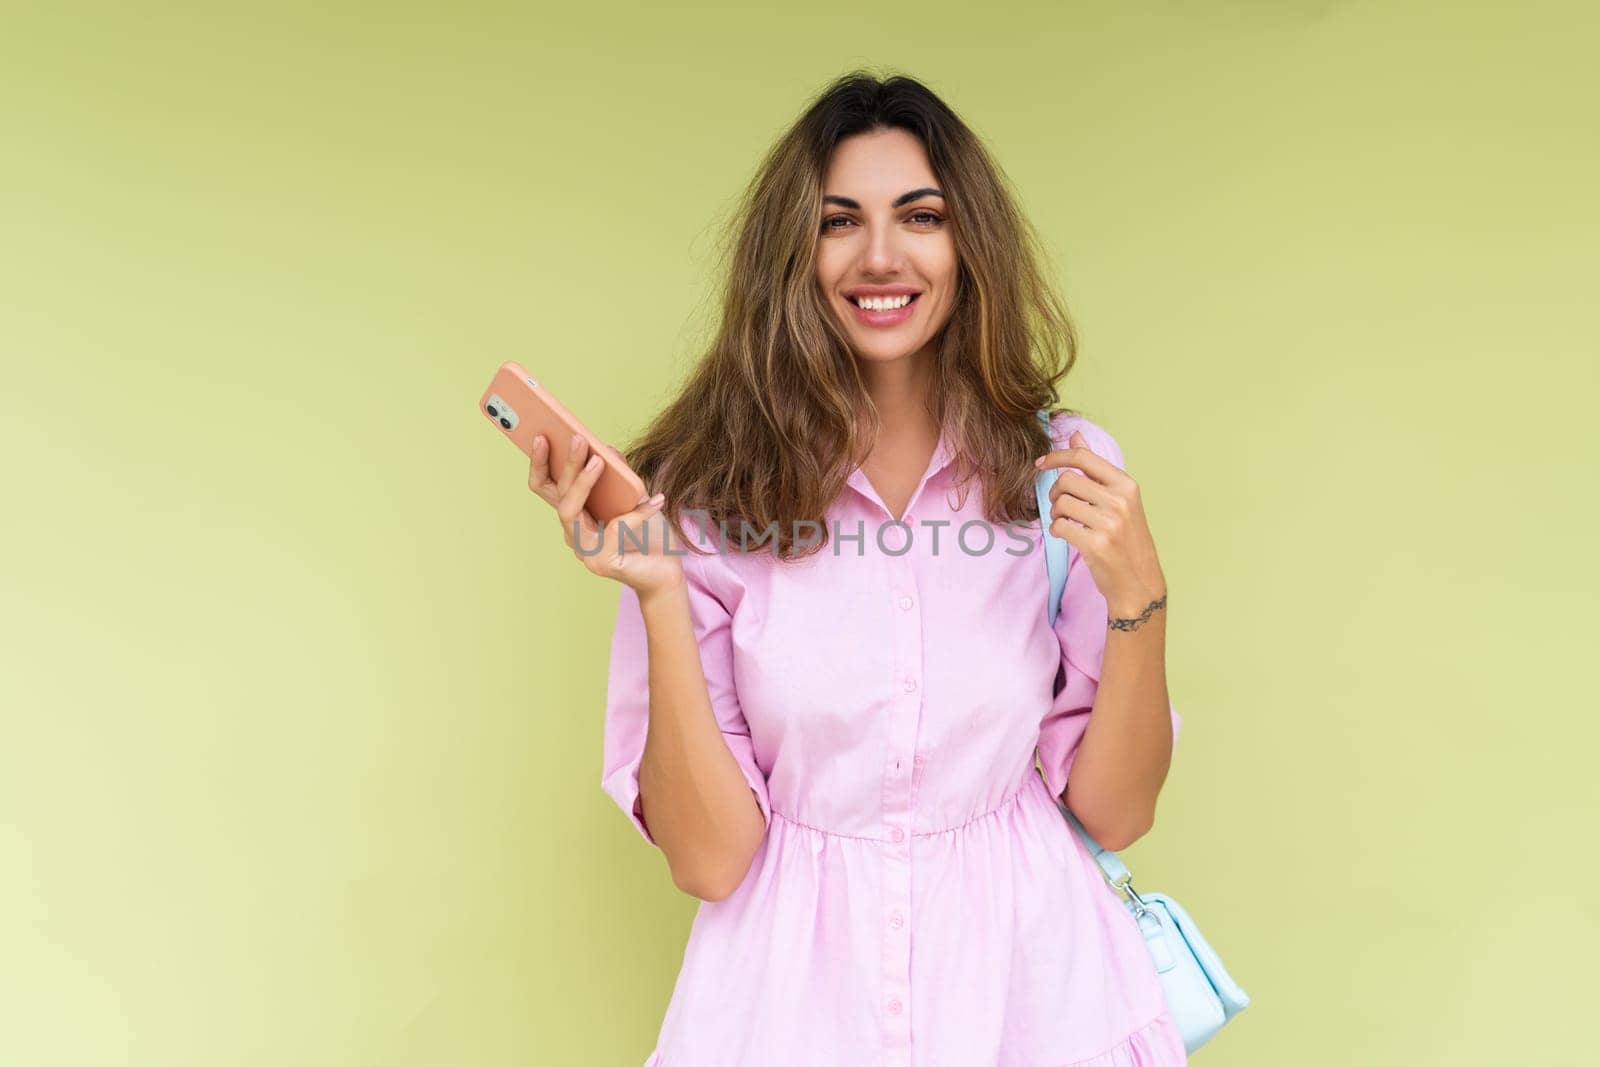 Young woman in casual wear isolated on green background holding phone and look to camera with a big natural smile by kroshka_nastya